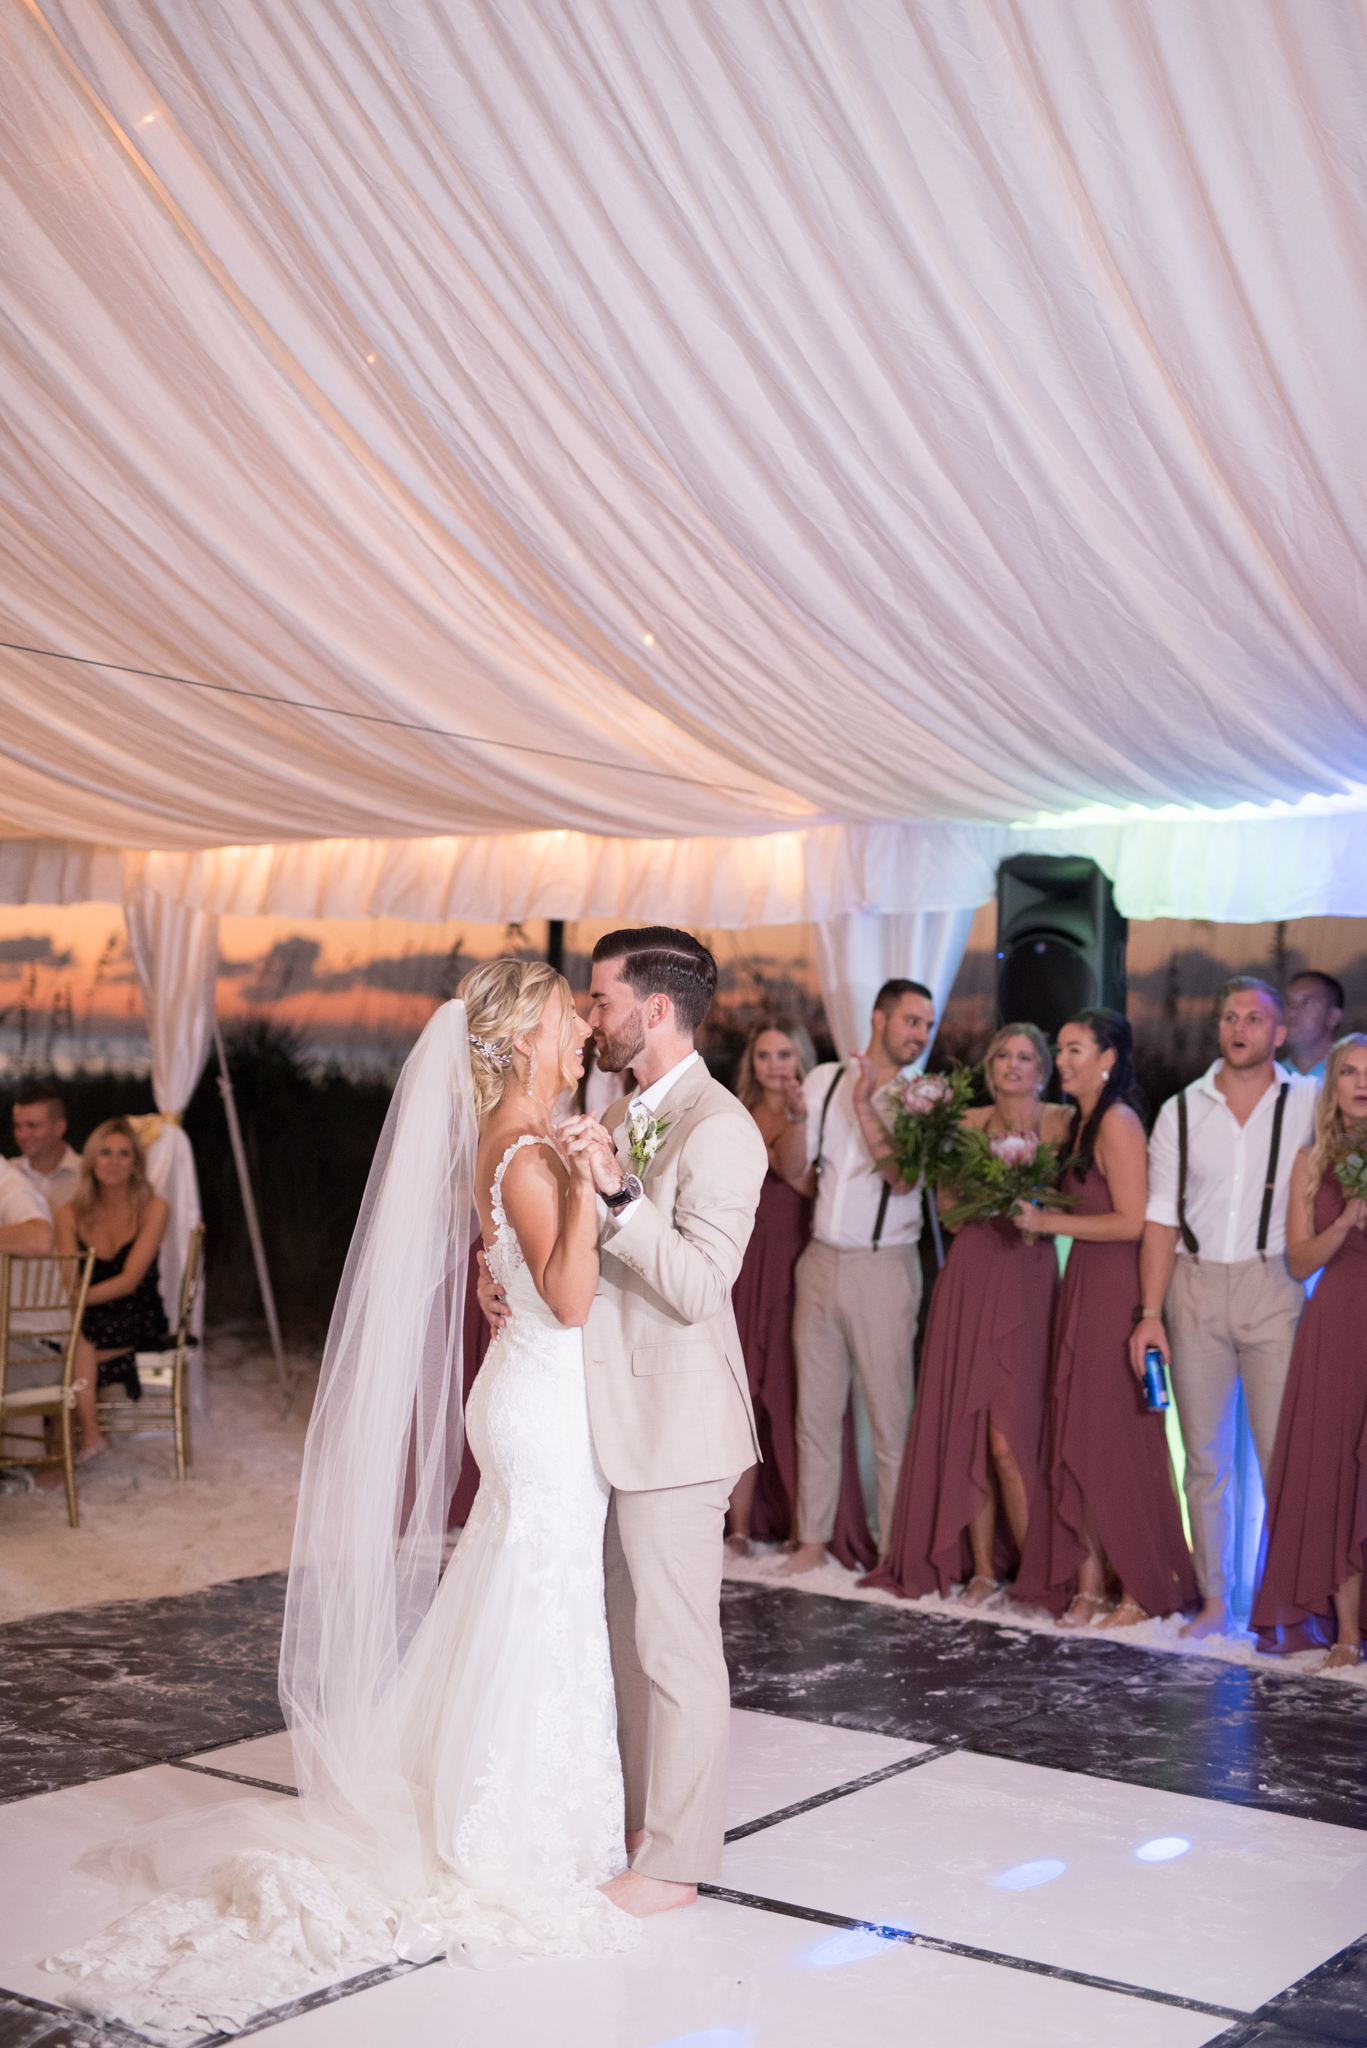 Bride and groom share first dance as married couple.